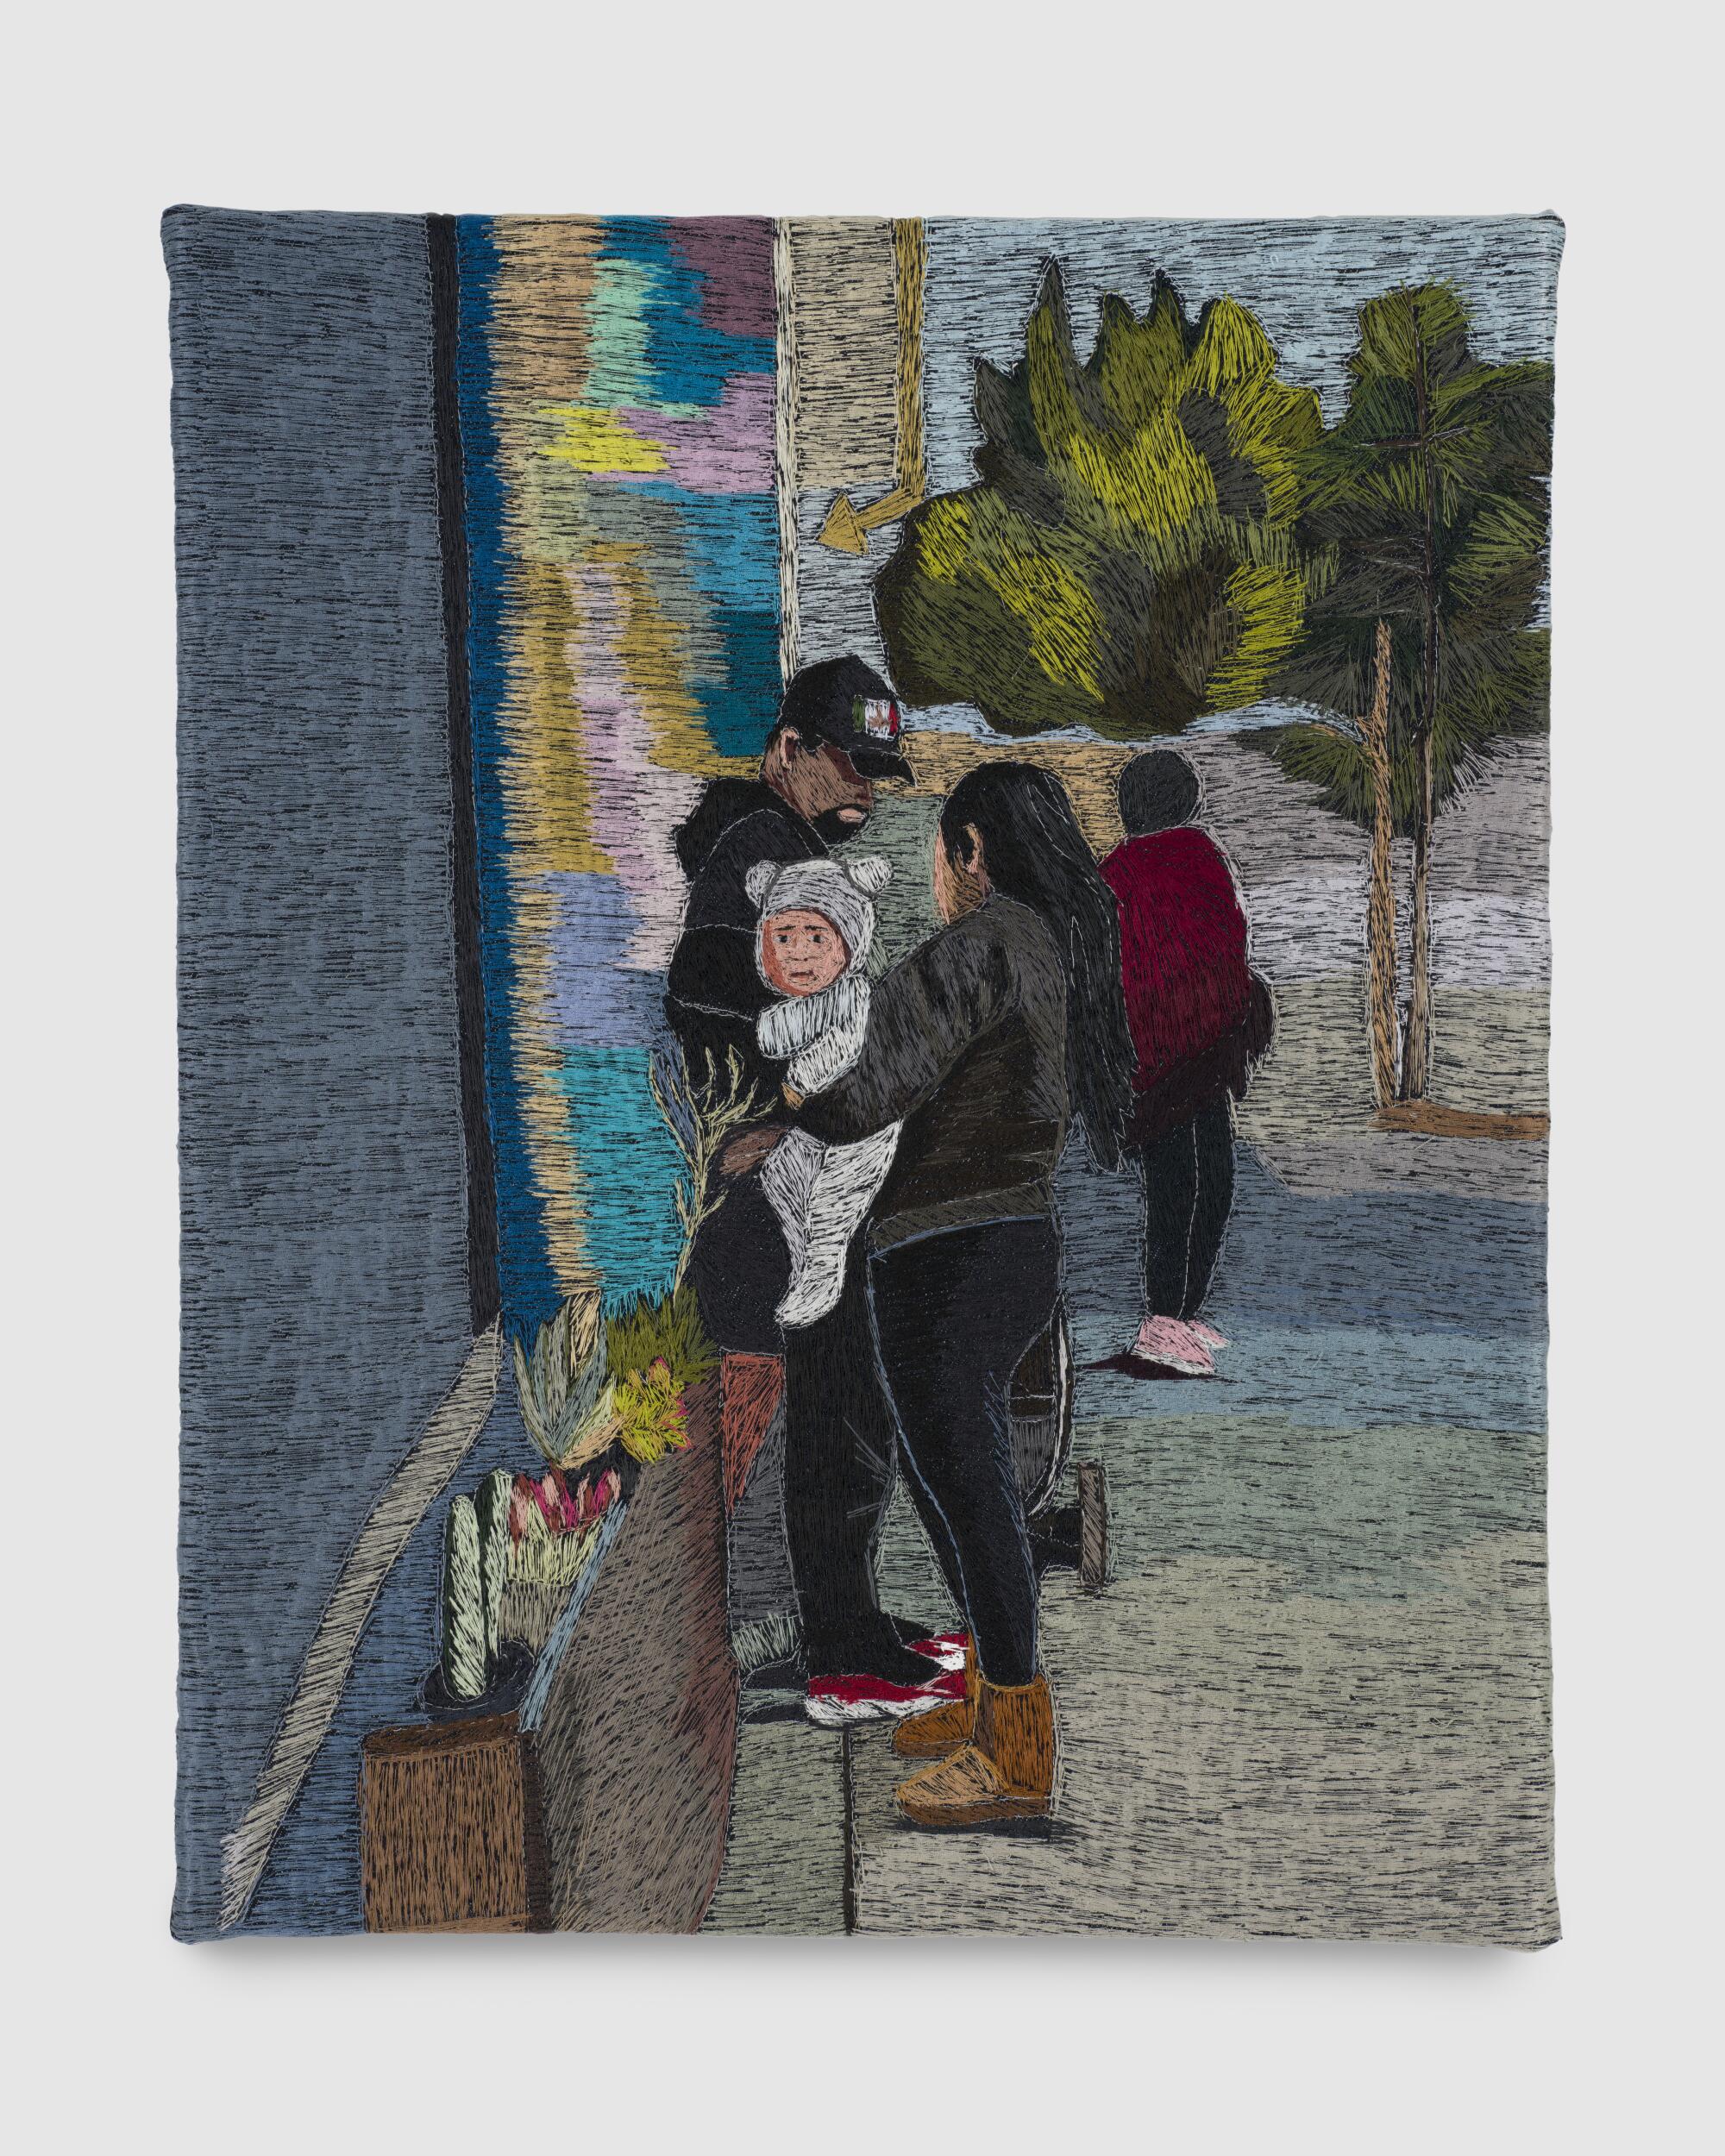 Erick Medel, “Young Familia,” Polyester thread on denim, 20 x 16 inches, 2024.